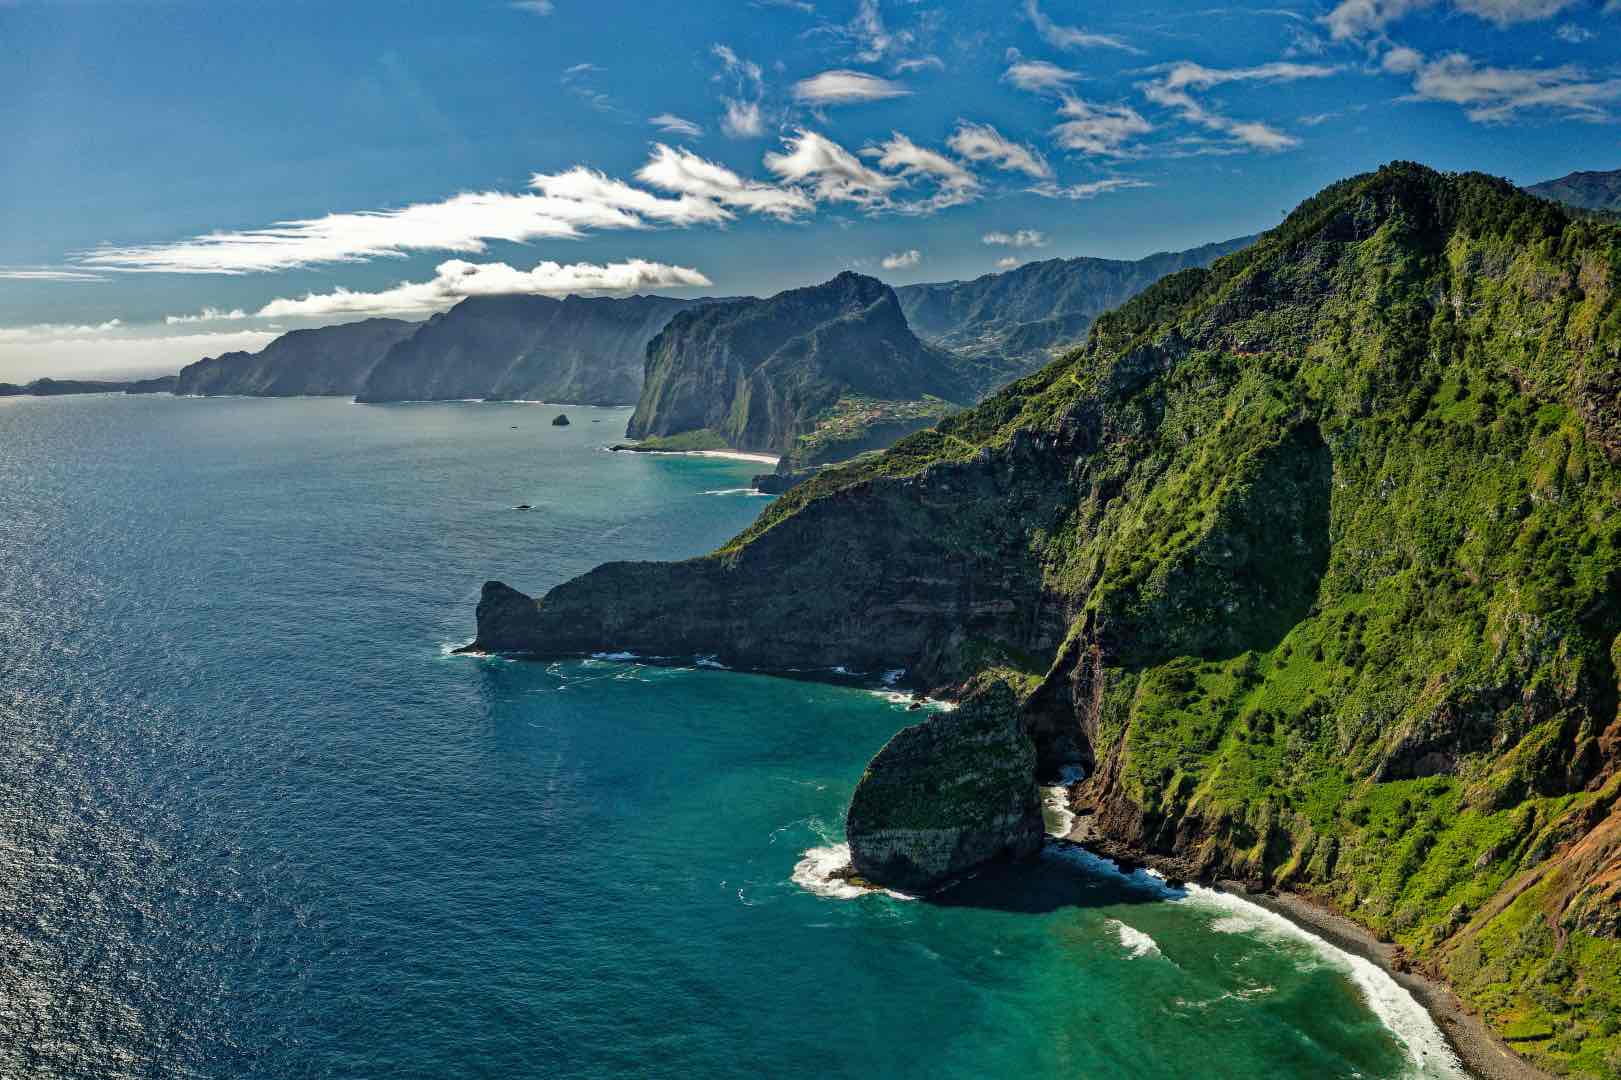 Looking east along the north coast of Madeira